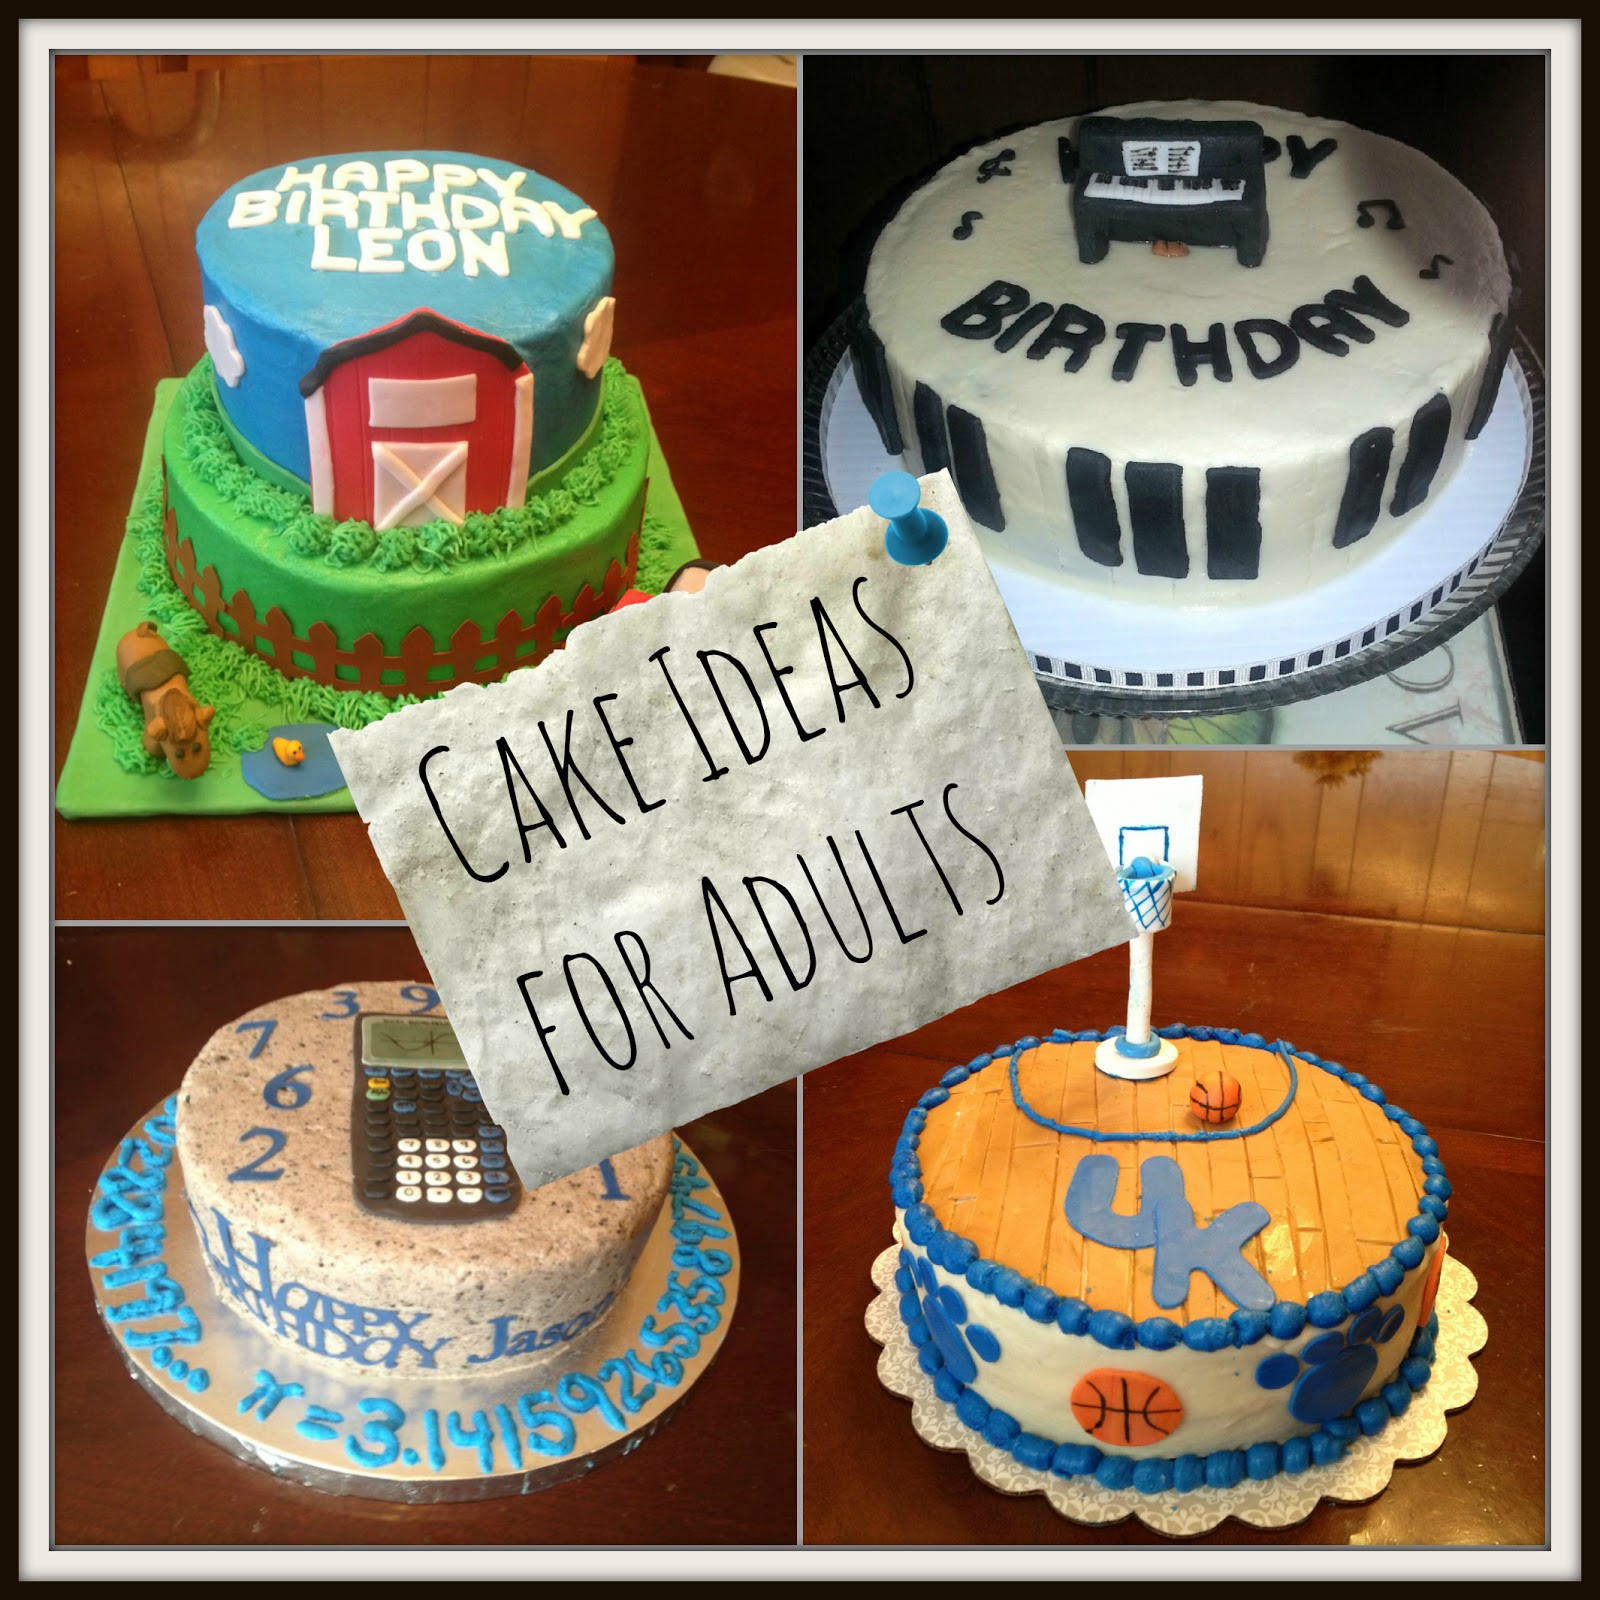 Birthday Gift Ideas For Adults
 Birthday Cake Ideas for Adults